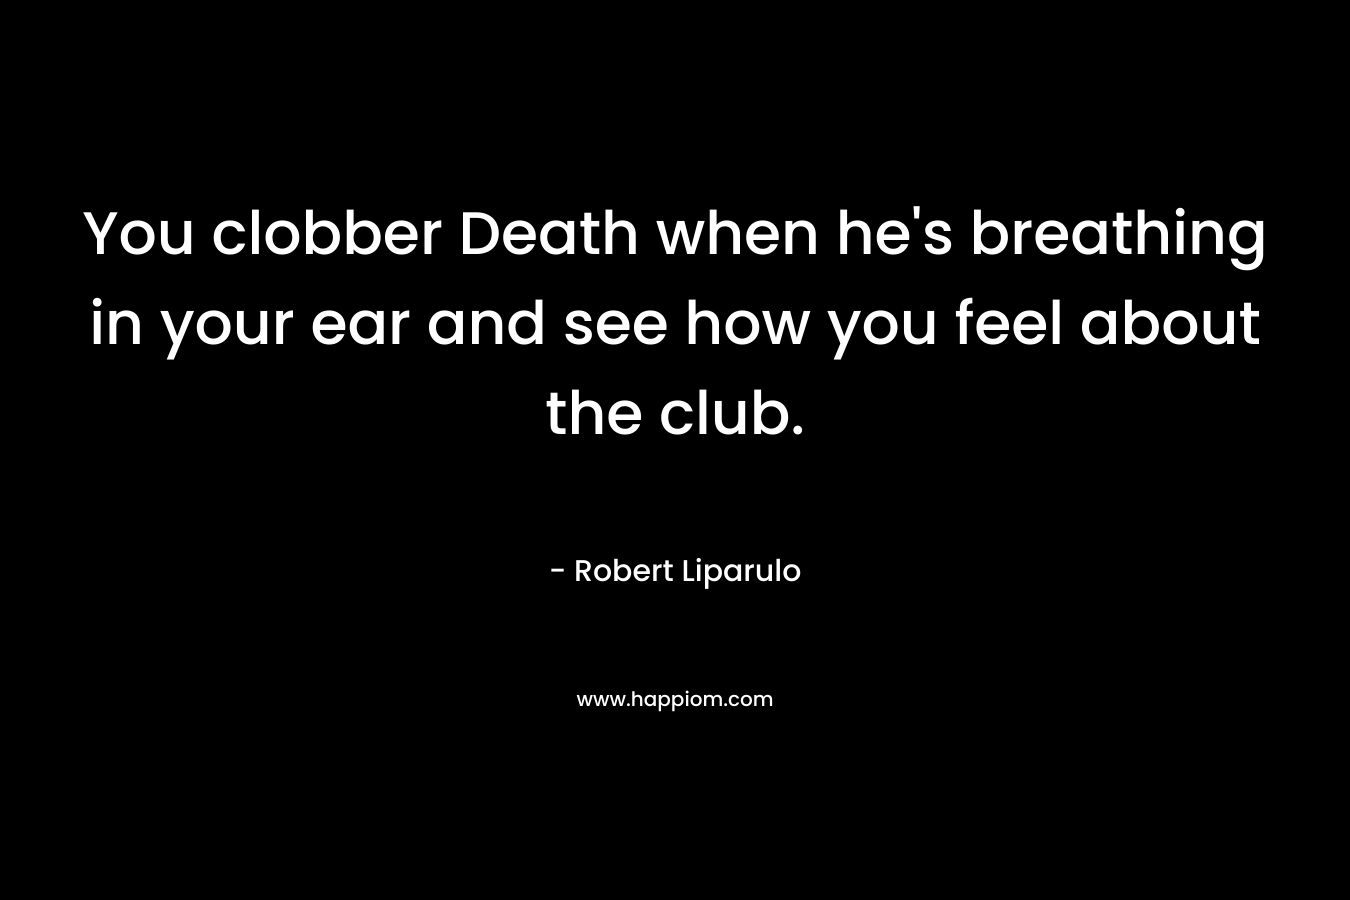 You clobber Death when he’s breathing in your ear and see how you feel about the club. – Robert Liparulo